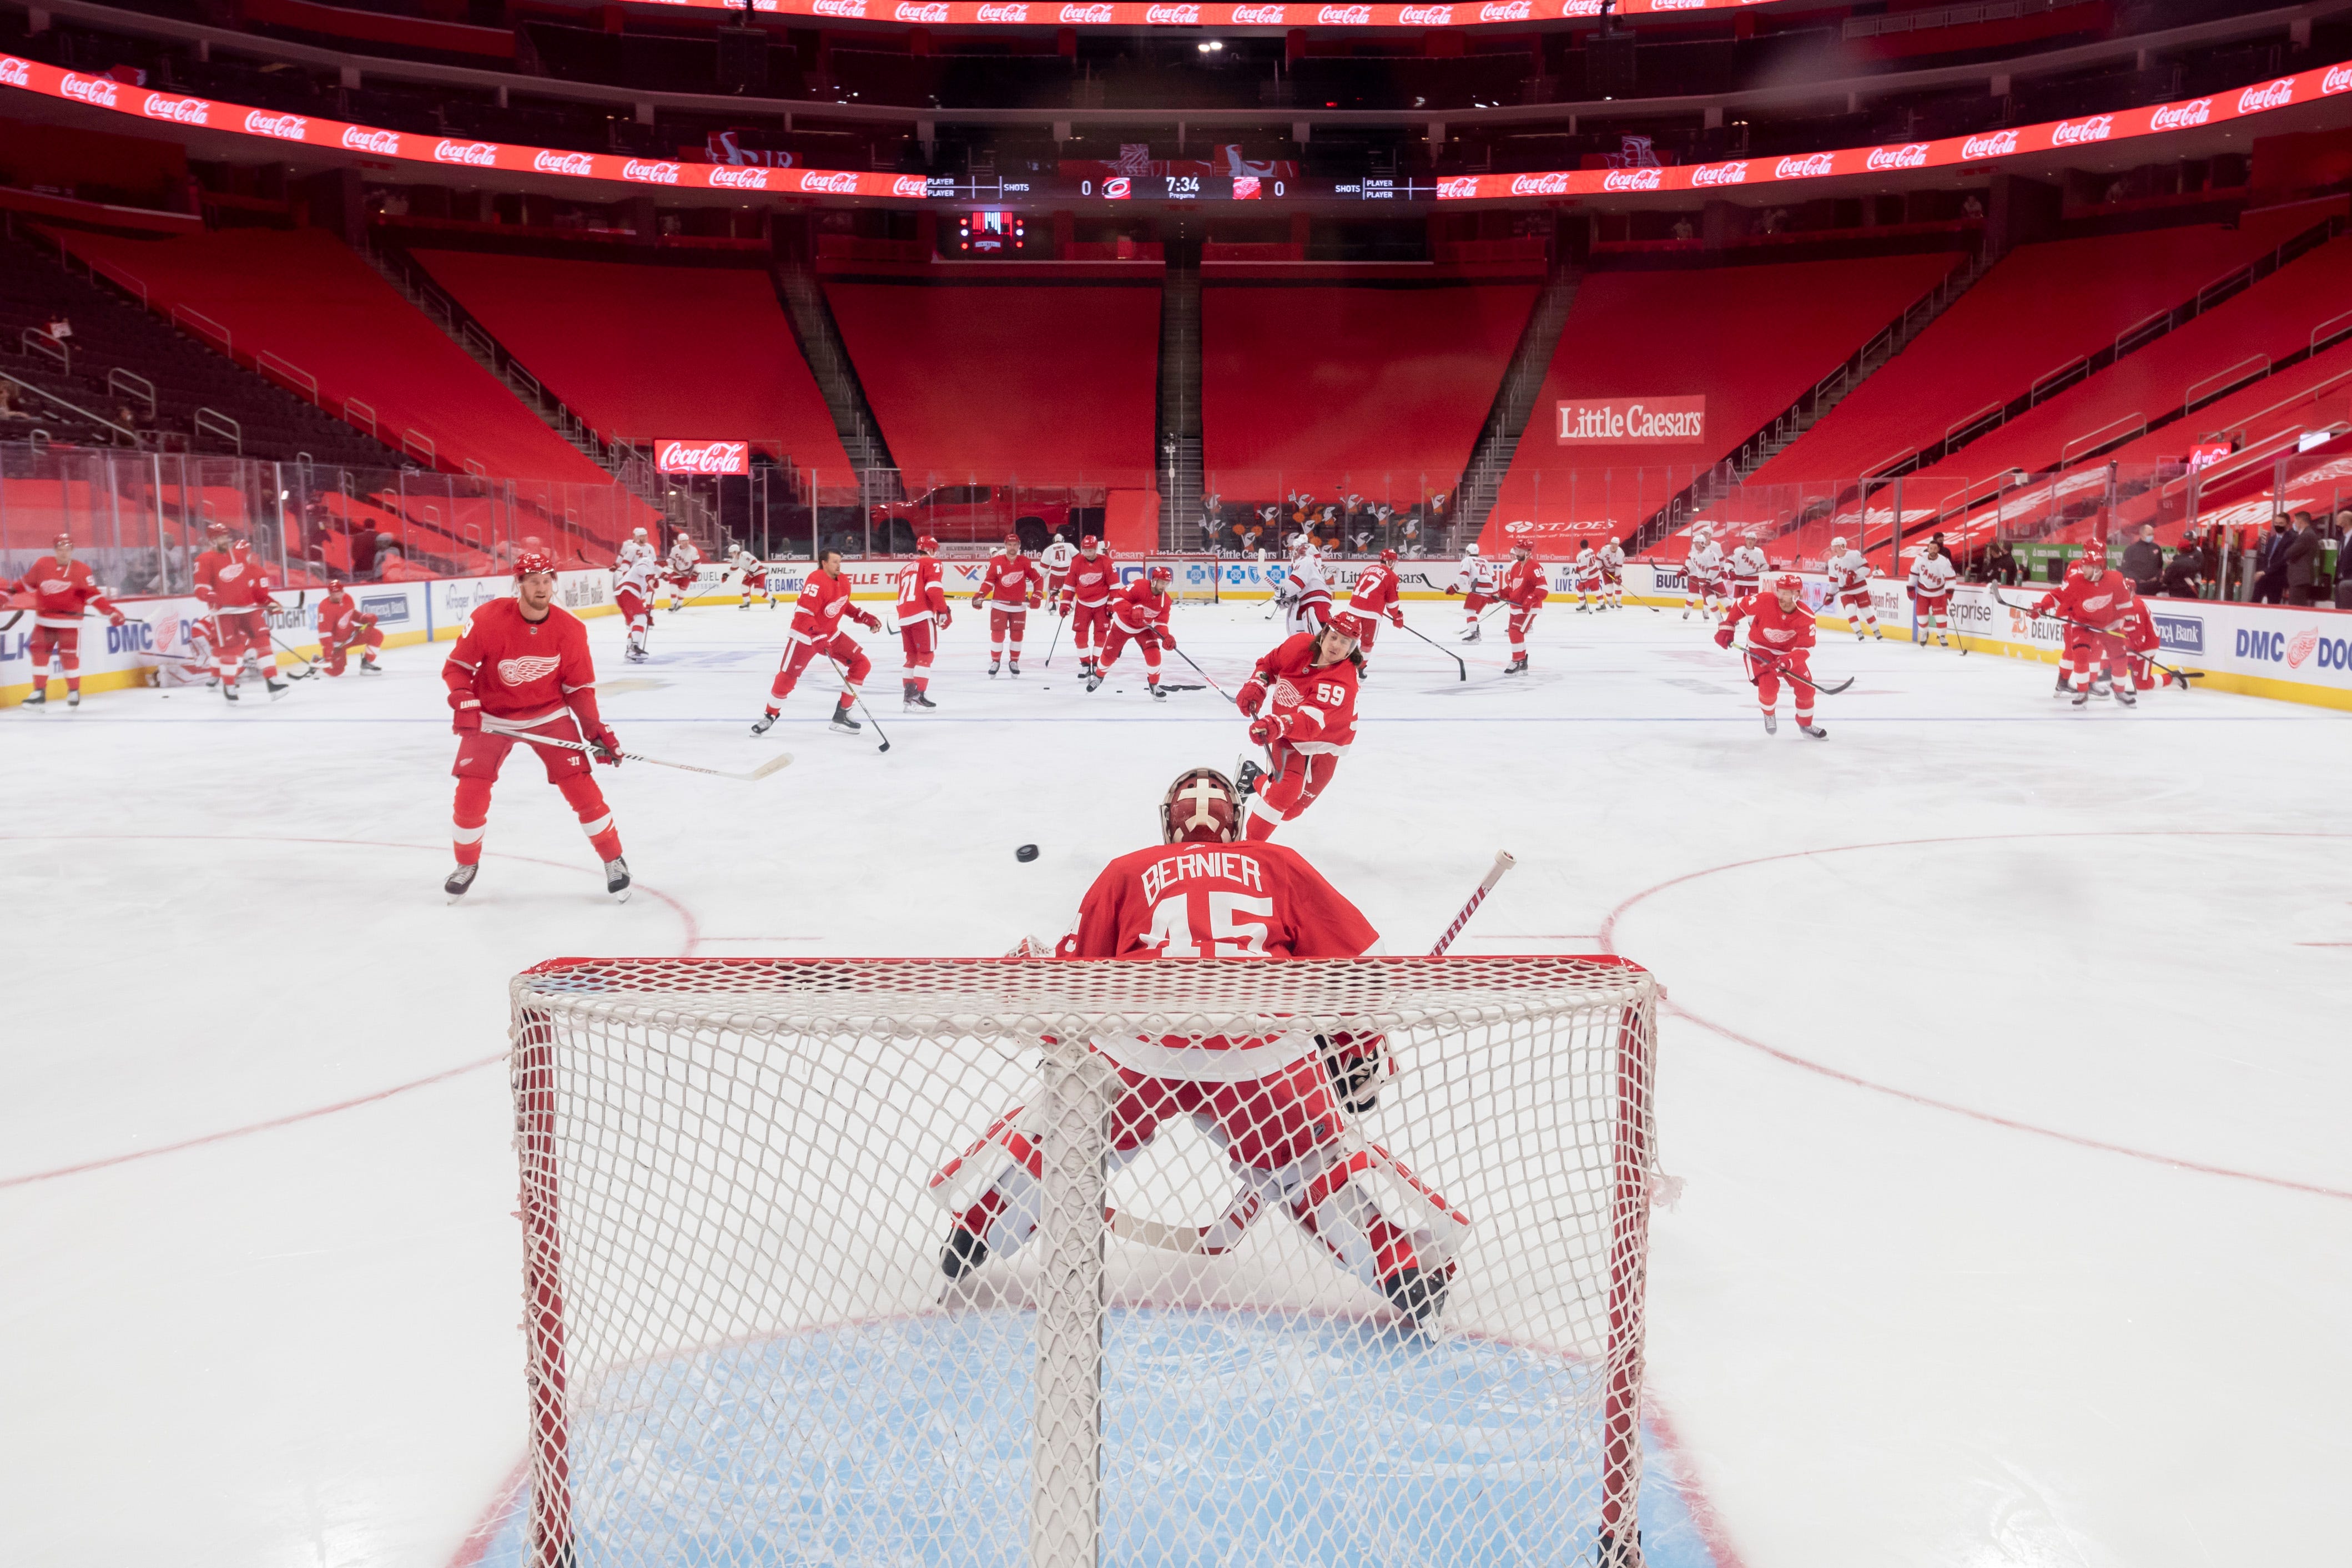 The Red Wings warm up before the start of a game against the Carolina Hurricanes, at Little Caesars Arena, in Detroit, January 16, 2021.